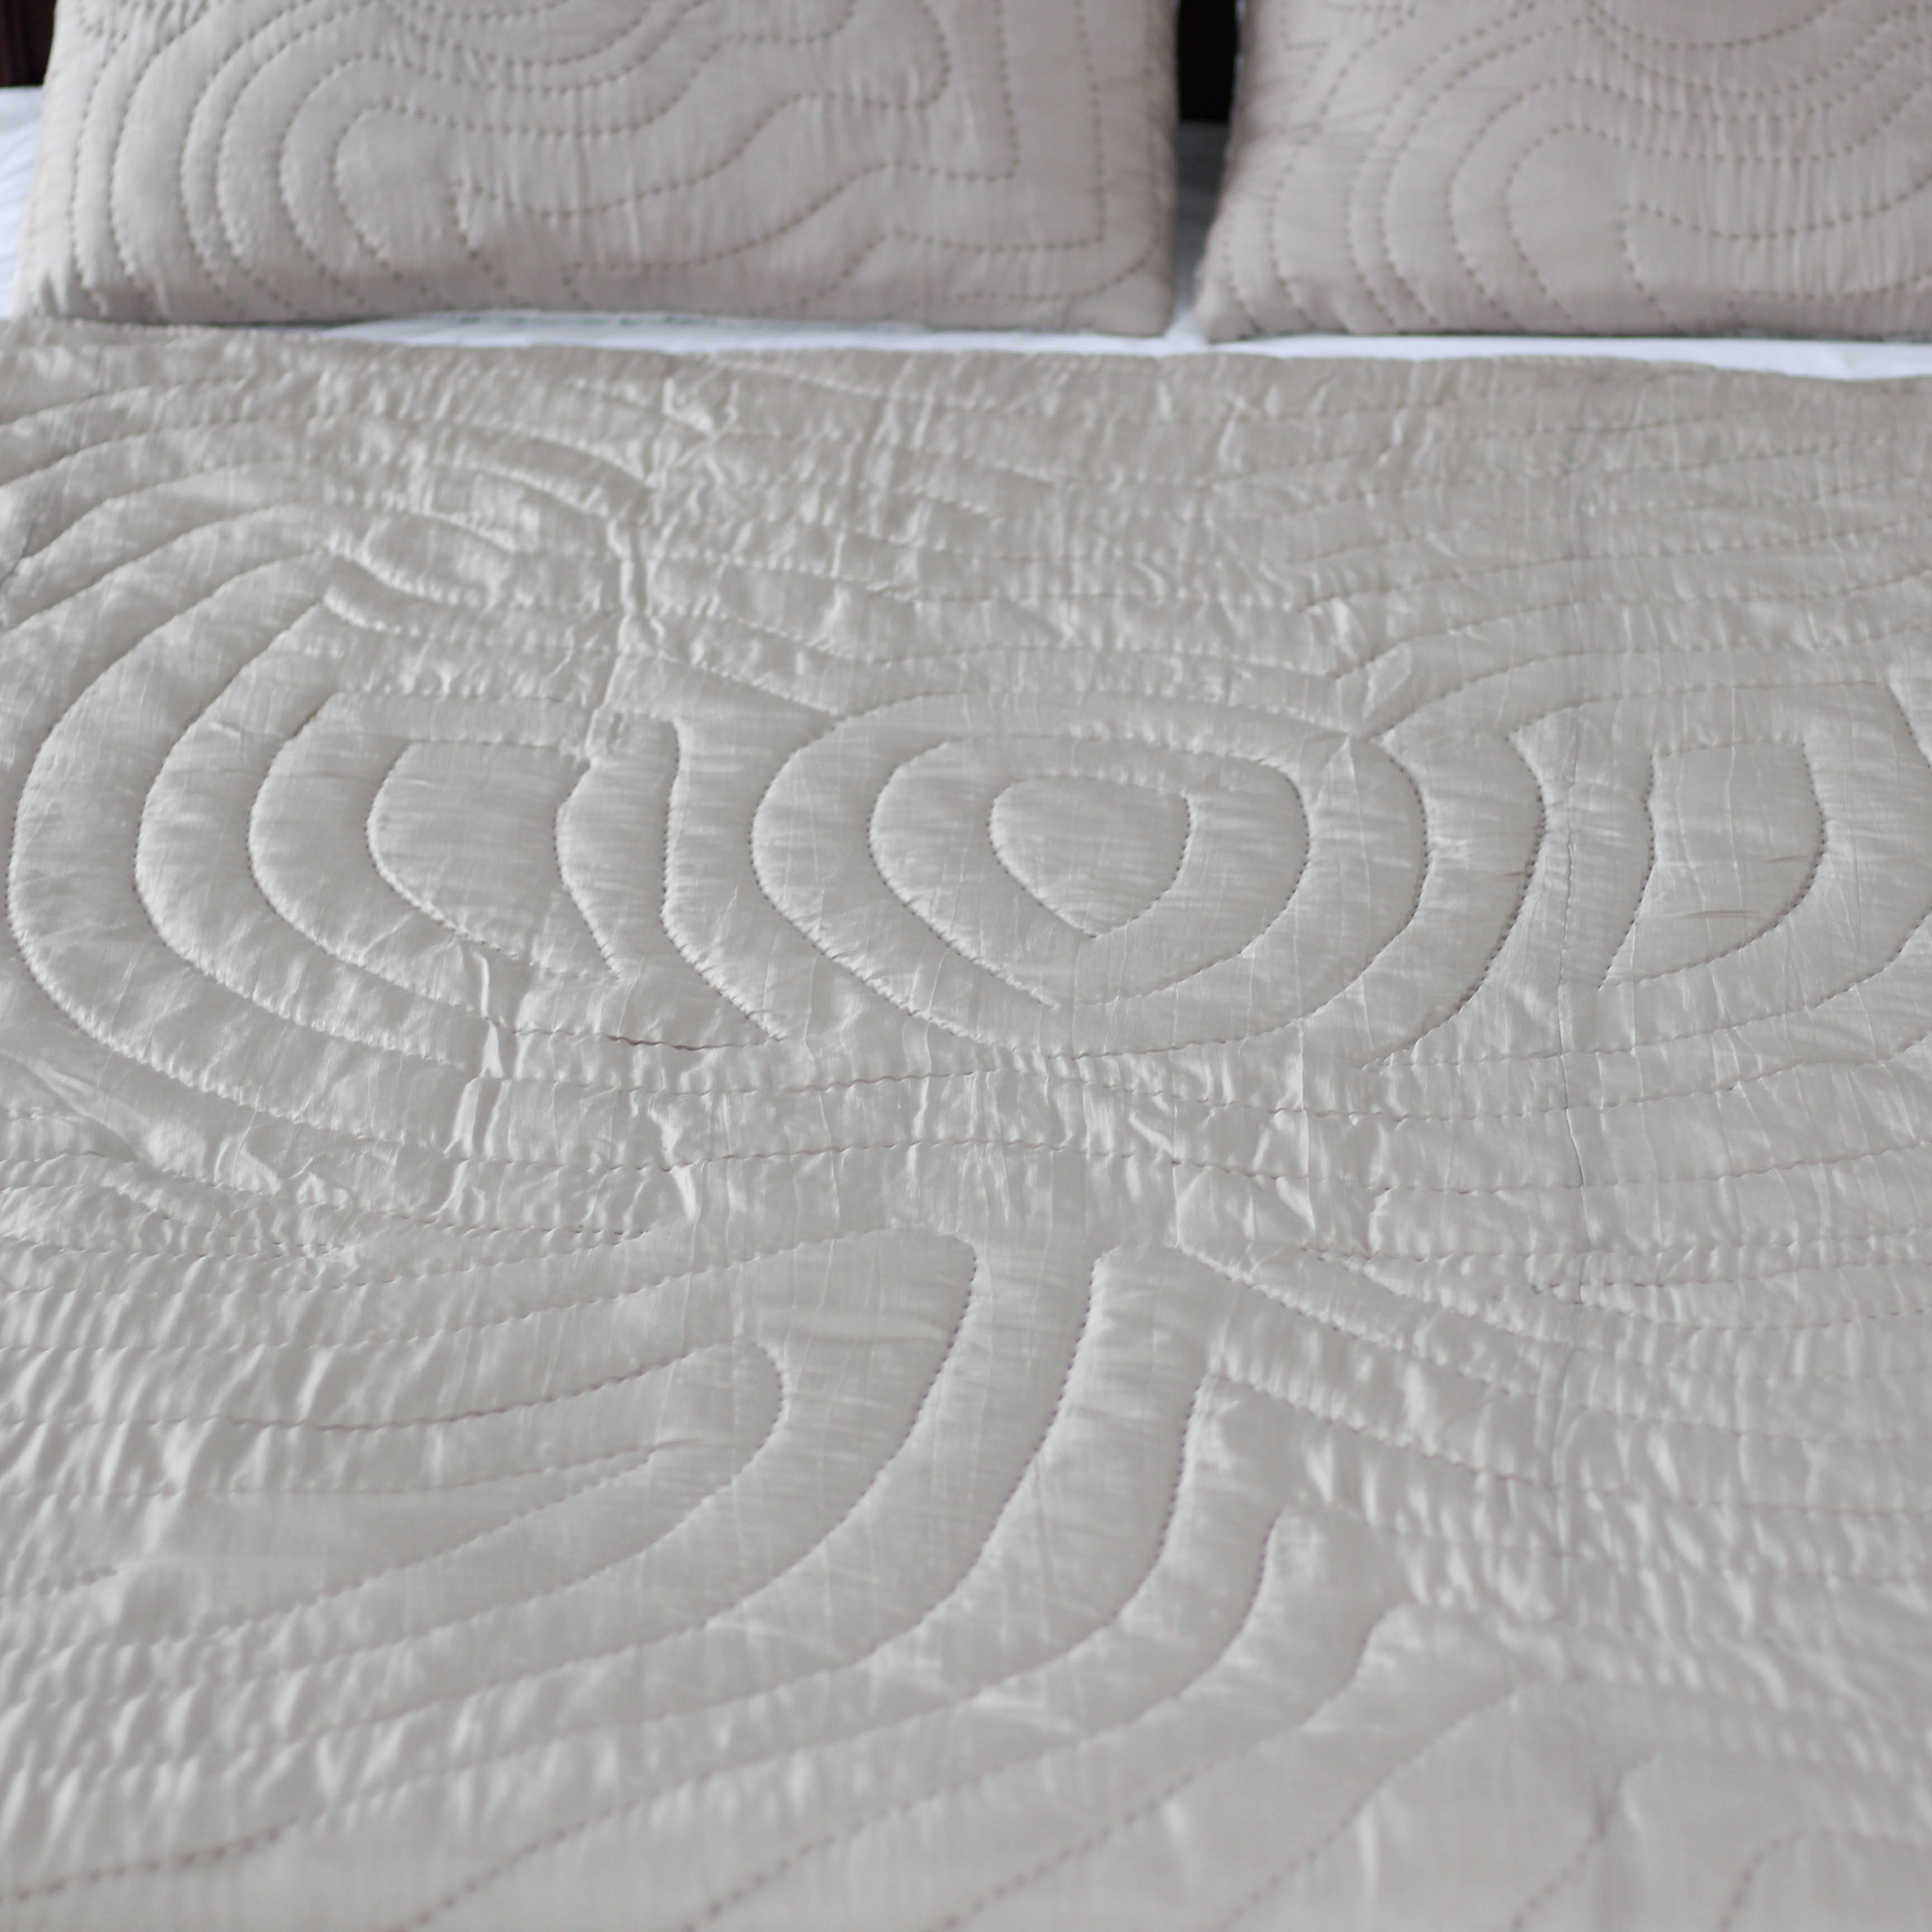 Mulberry Silk Hand Quilted Comforter Set-Lotus Leaf